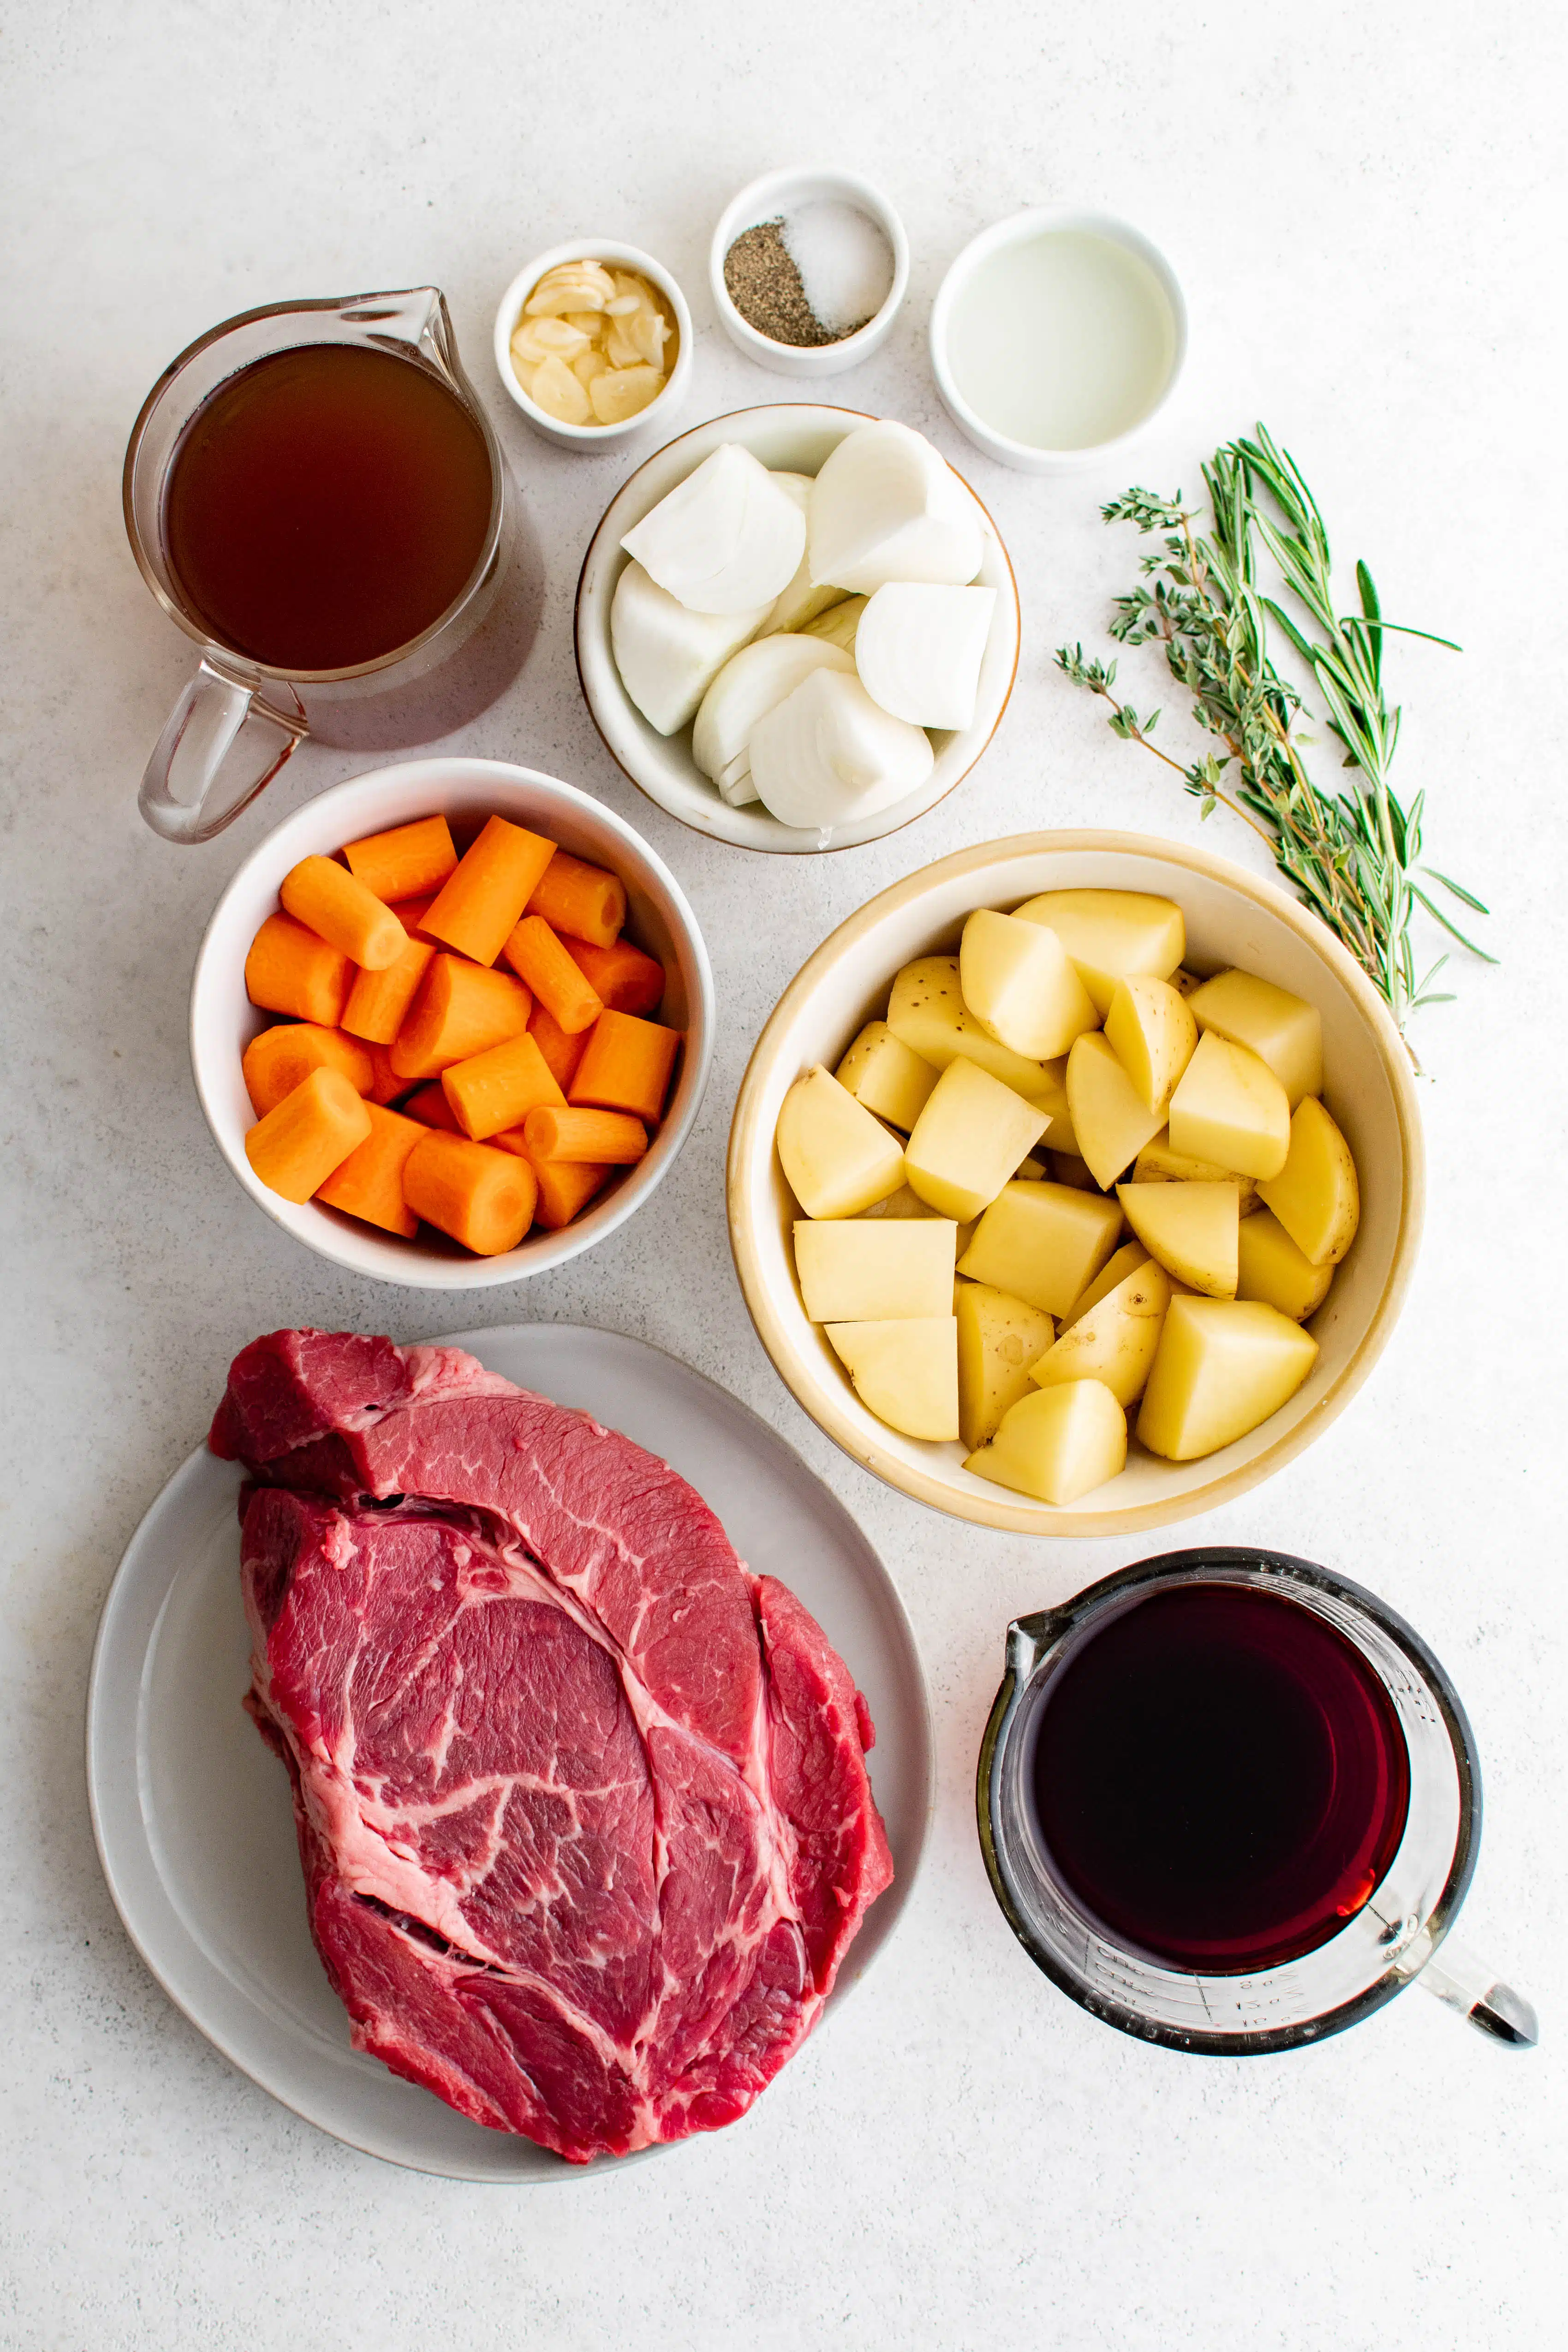 All of the ingredients needed to make Dutch Oven Pot Roast set aside in individual serving bowls.